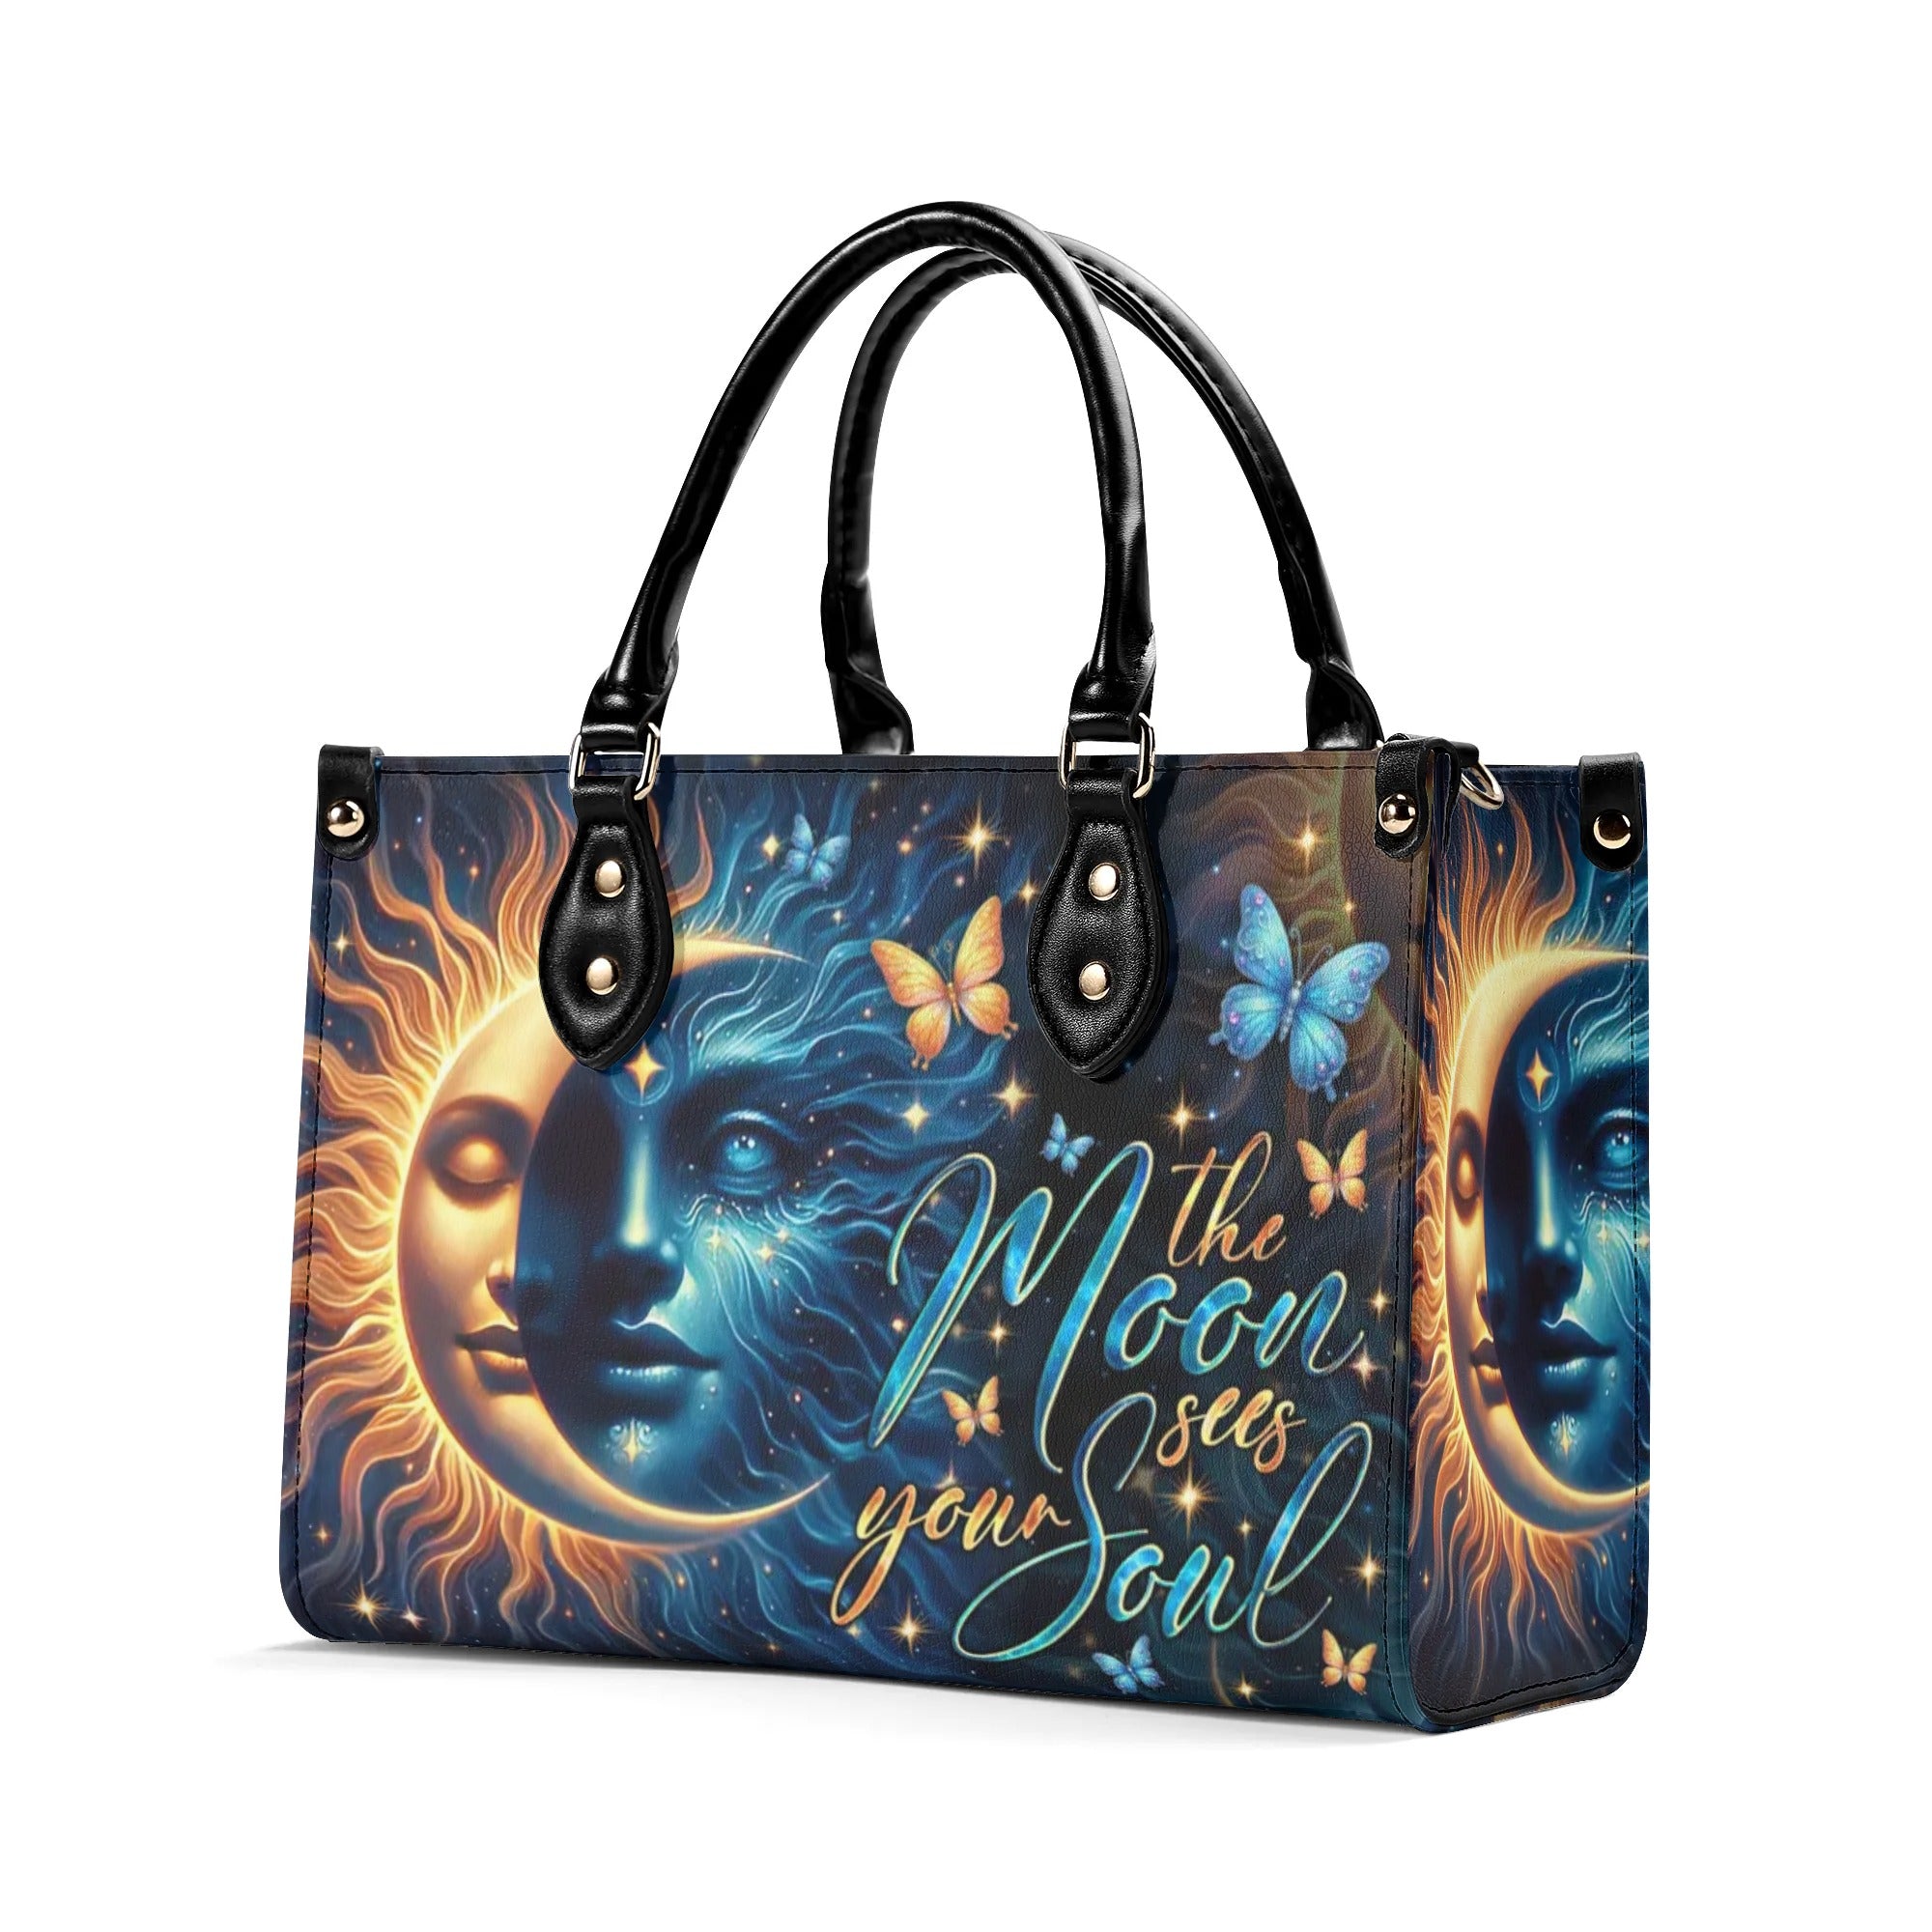 THE MOON SEES YOUR SOUL LEATHER HANDBAG - TLNO2706244